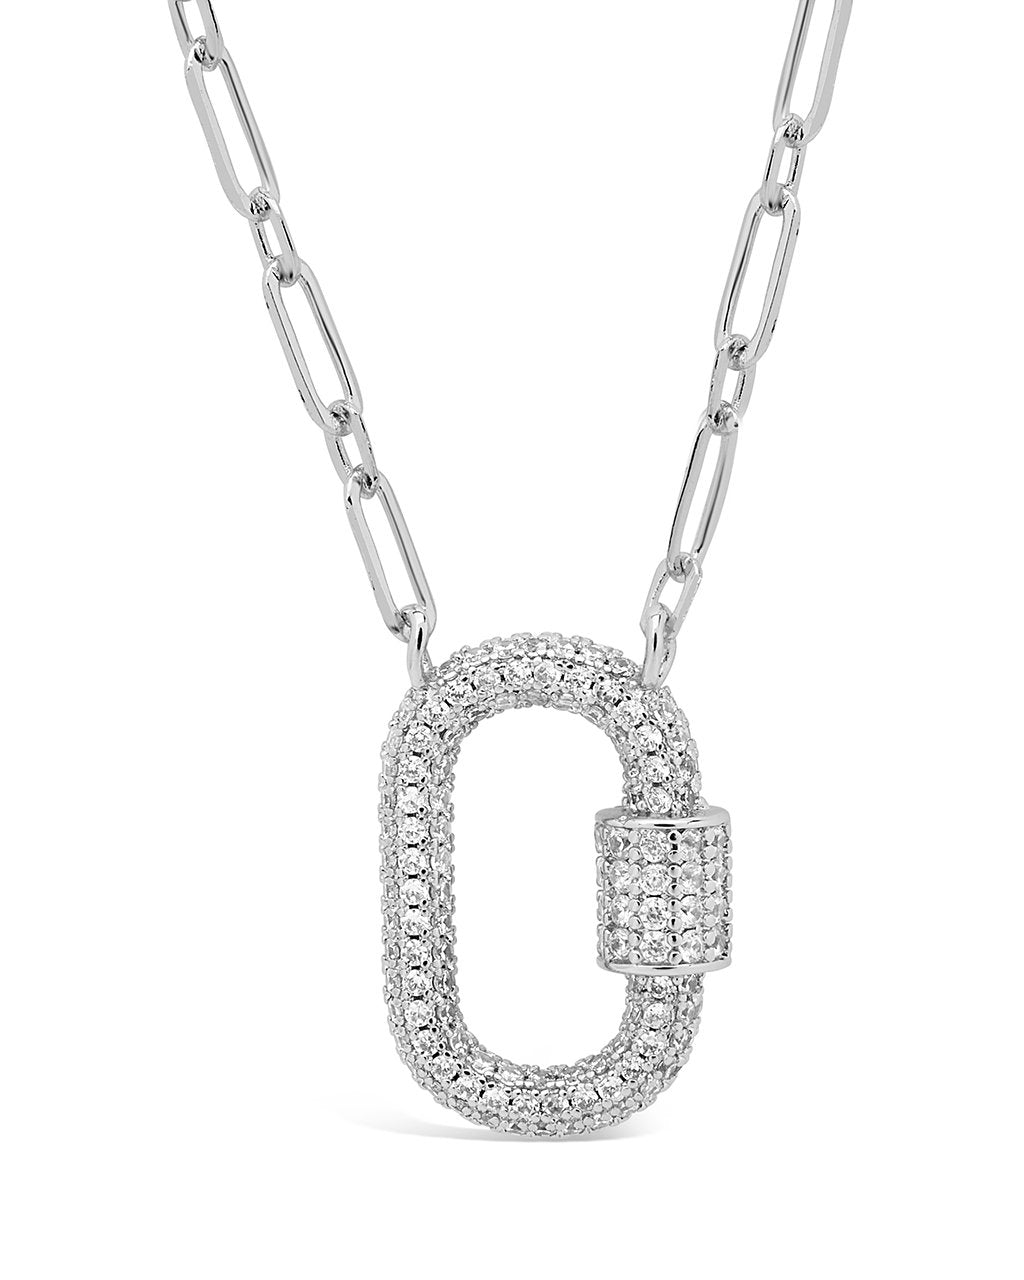 Pave CZ Carabiner Lock Necklace Necklace Sterling Forever Silver Clear